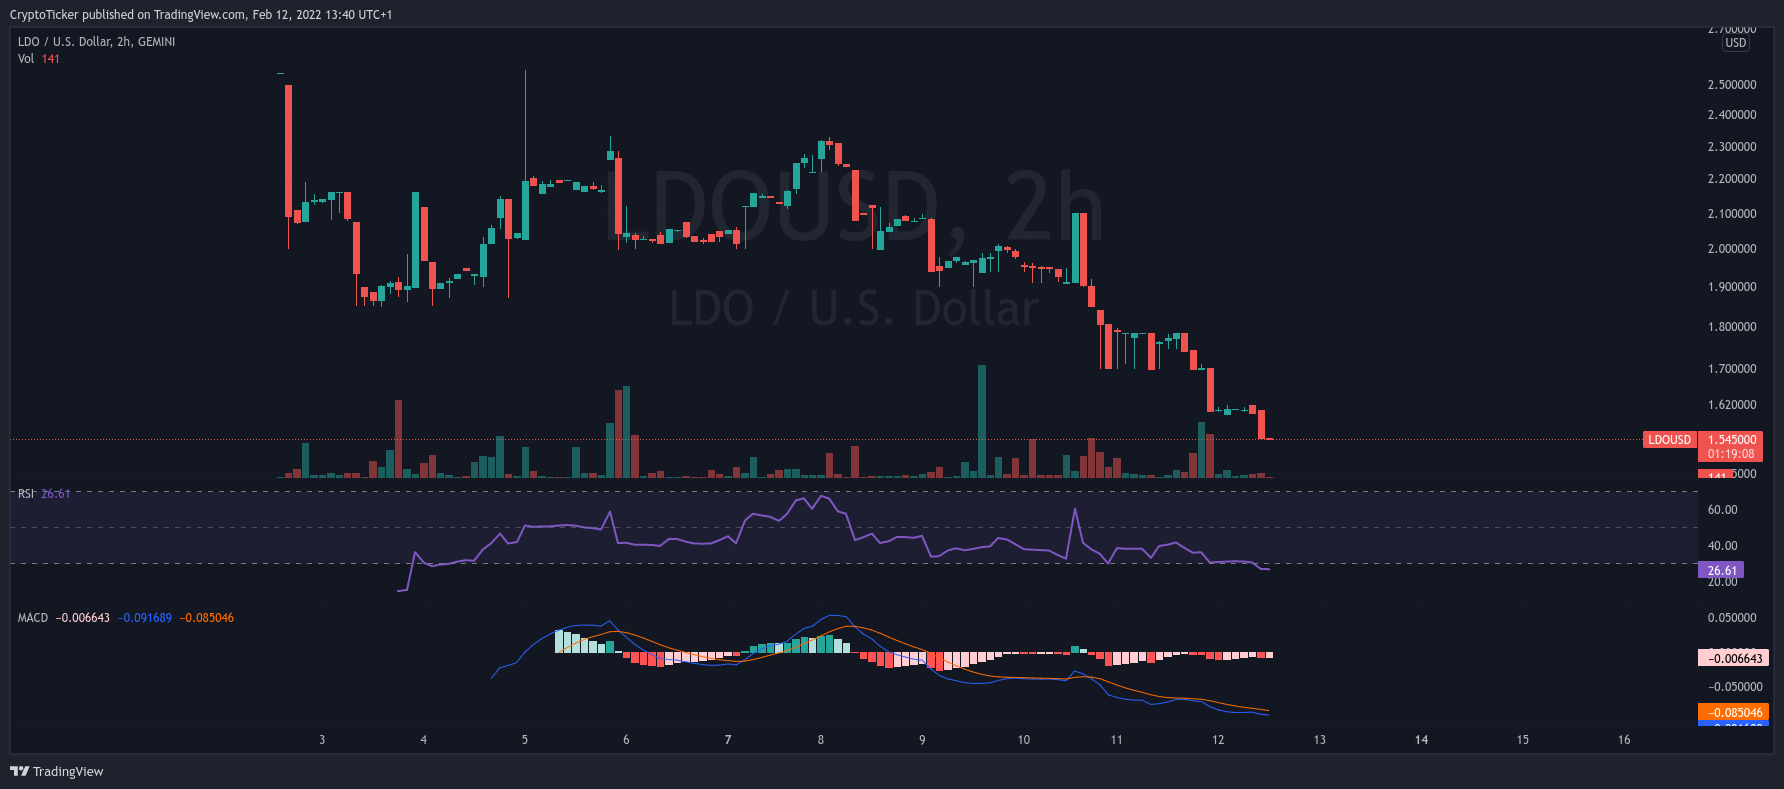 LDO price chart showing the drop